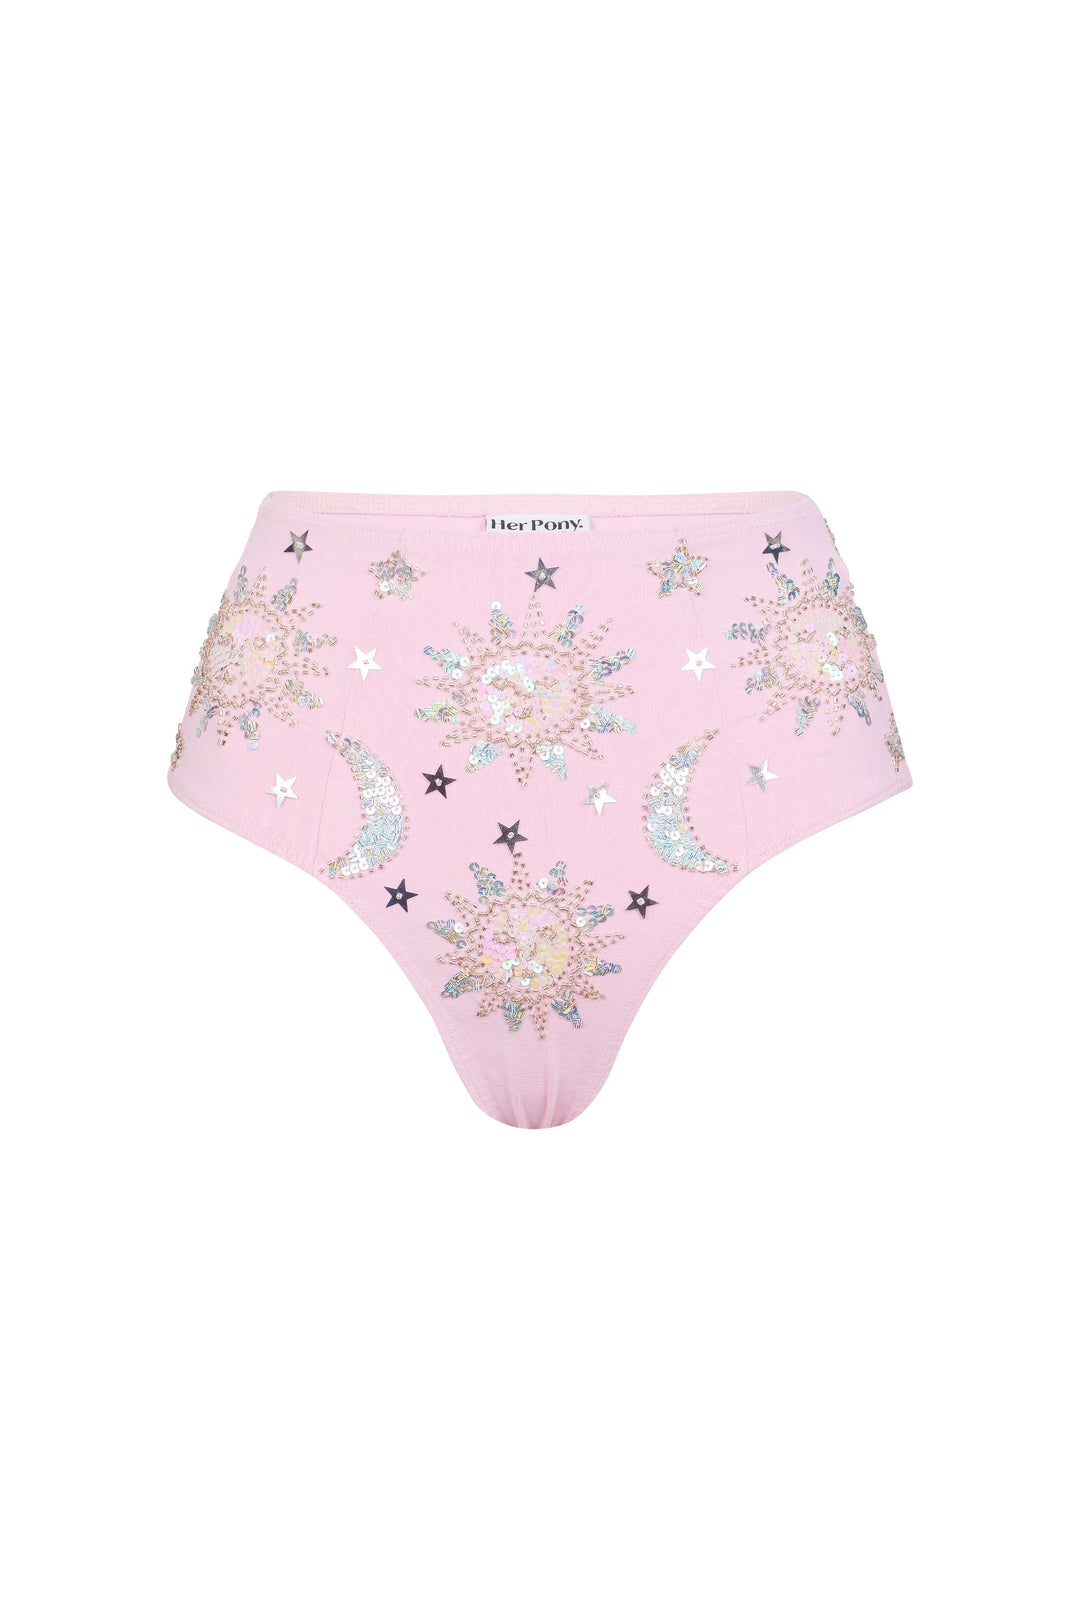 STELLA SEQUIN SPARKLE BLOOMERS - PINK/SILVER - Her Pony